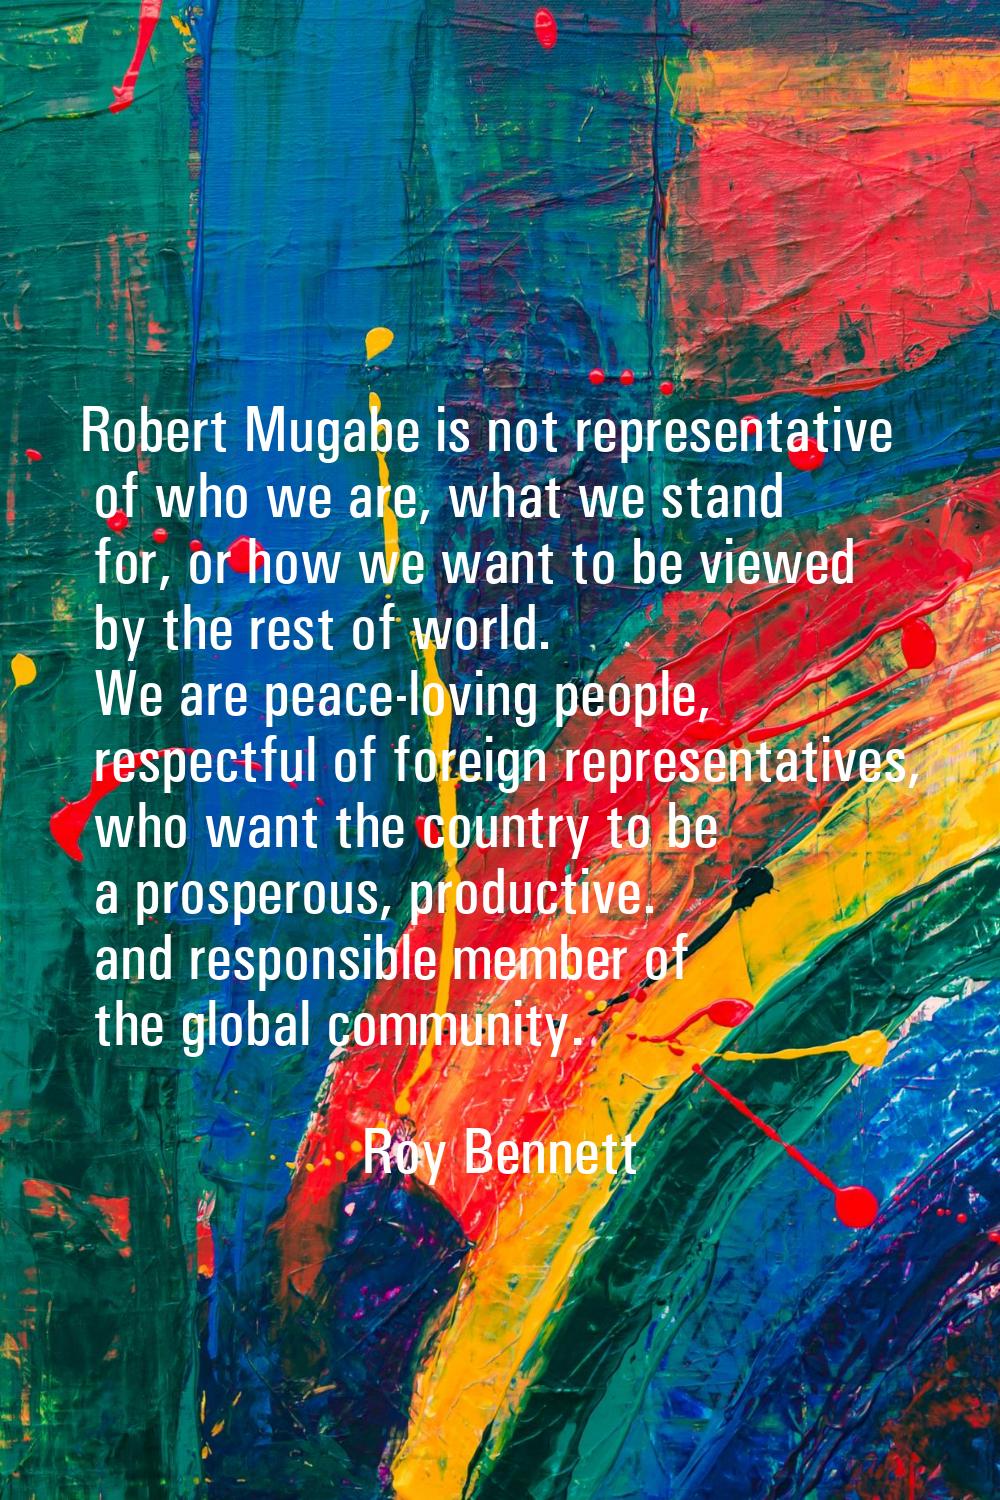 Robert Mugabe is not representative of who we are, what we stand for, or how we want to be viewed b